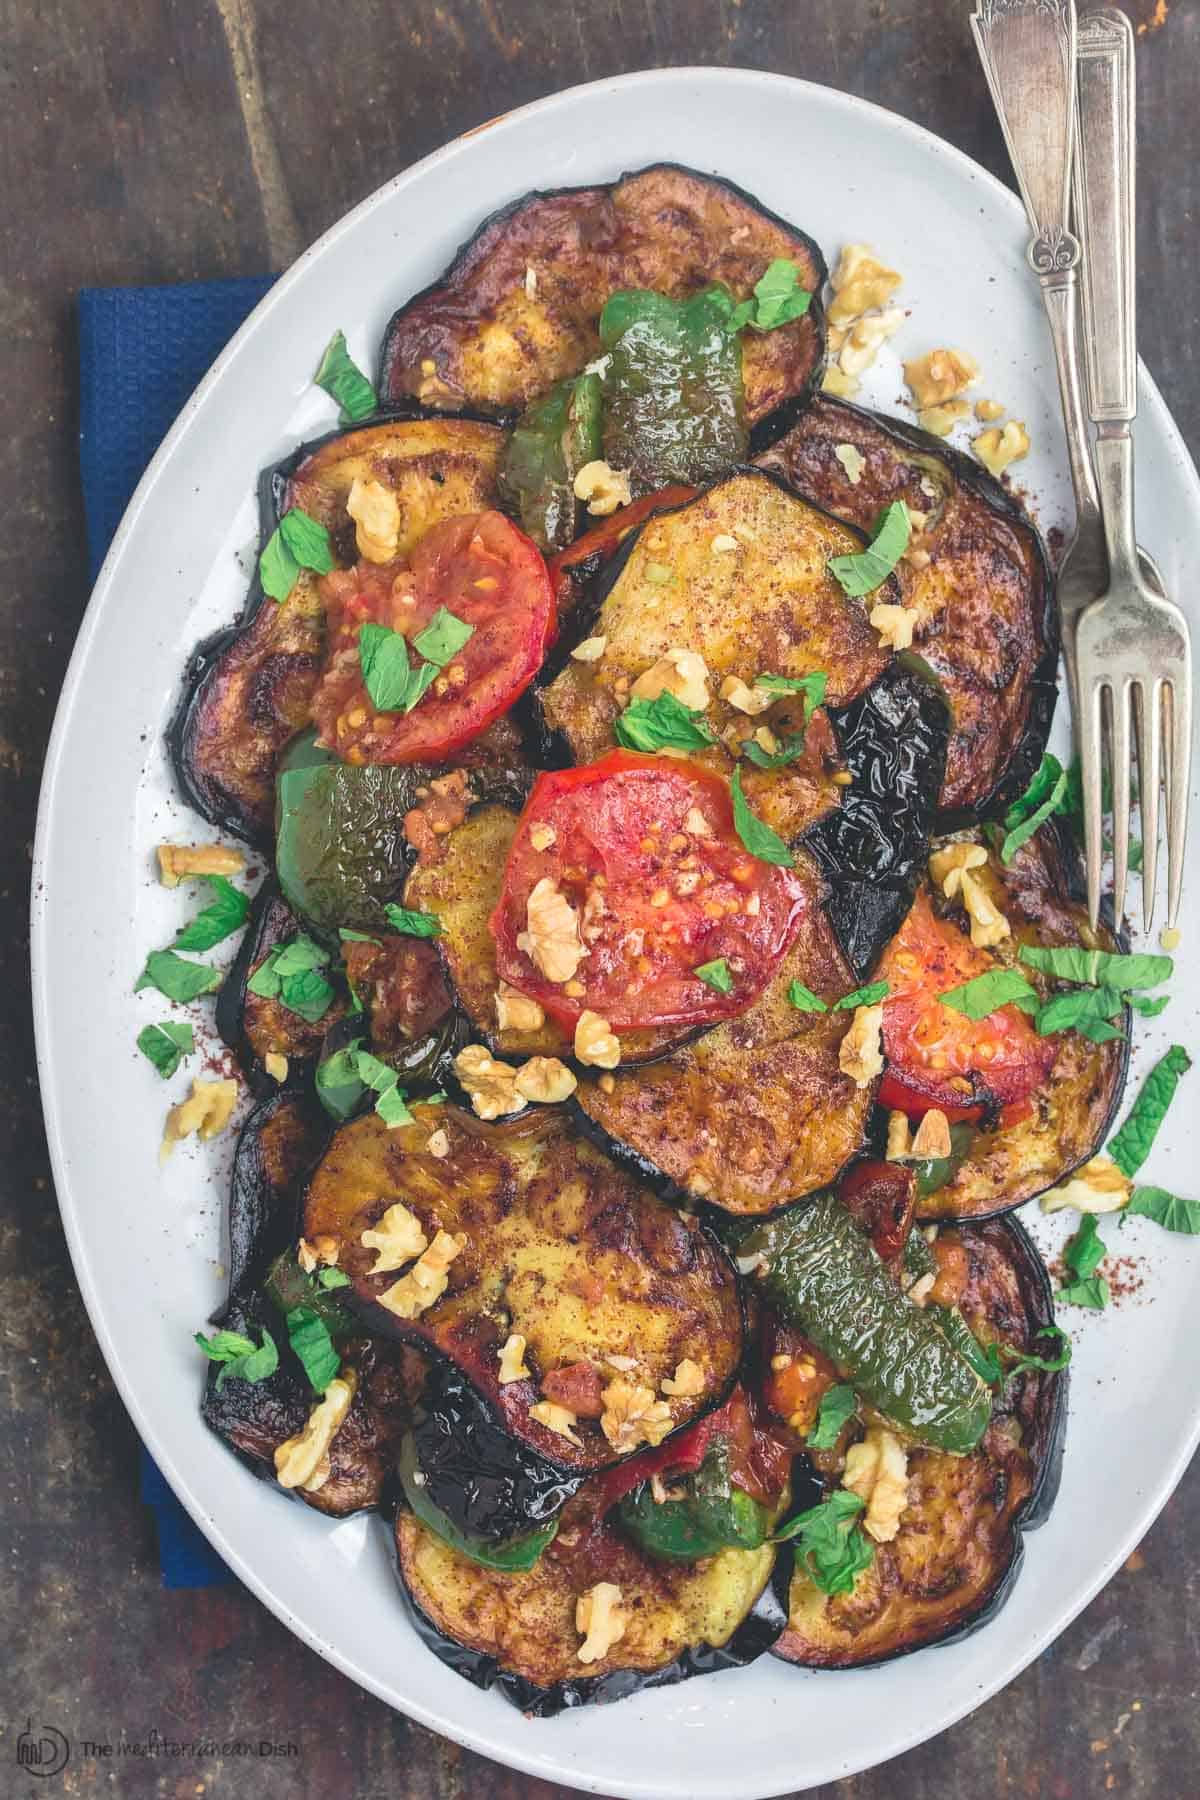 Slices of fried eggplant and vegetables served on a plate